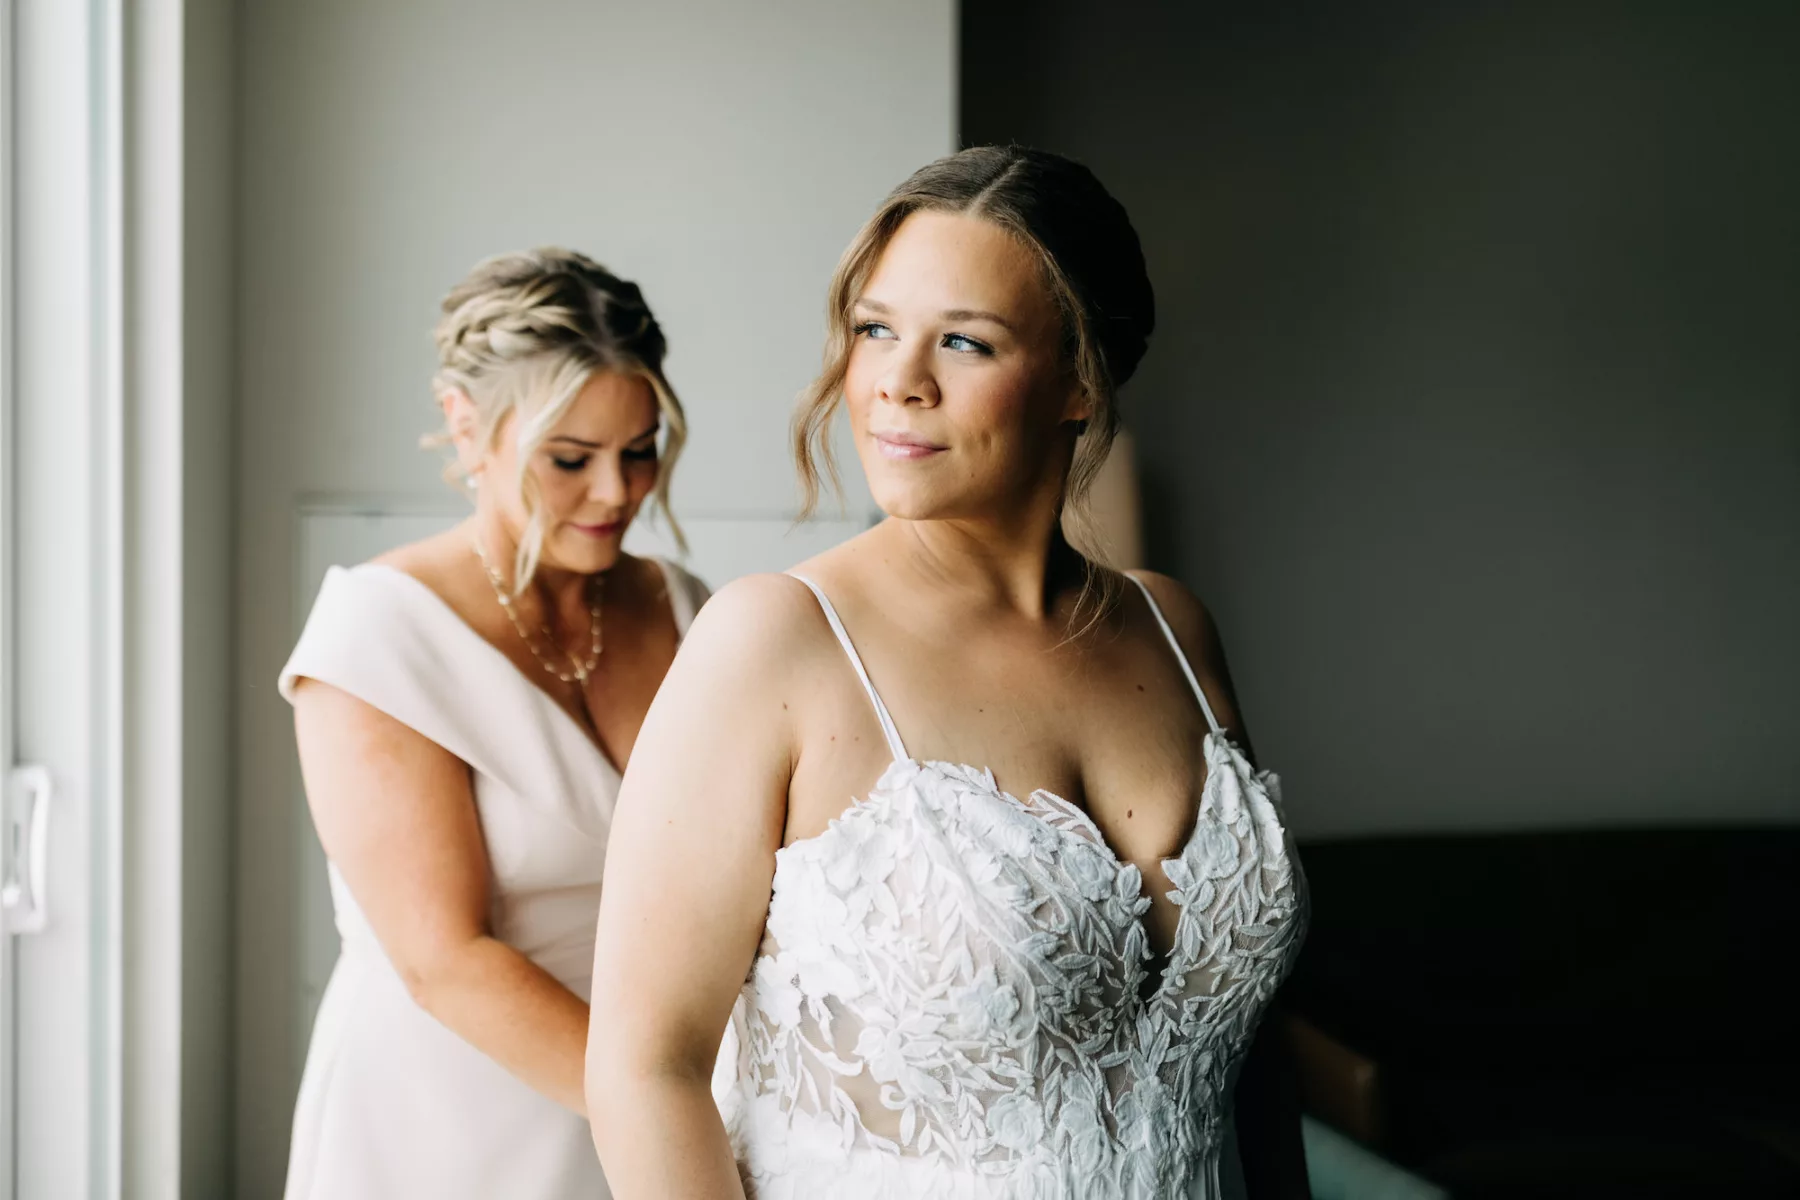 Bride Getting Ready | Ivory Spaghetti Strap Lace A Line Wedding Dress Ideas | Elegant Wedding Hair Updo and Makeup Inspiration | Tampa Bay Hair and Makeup Artist Adore Bridal